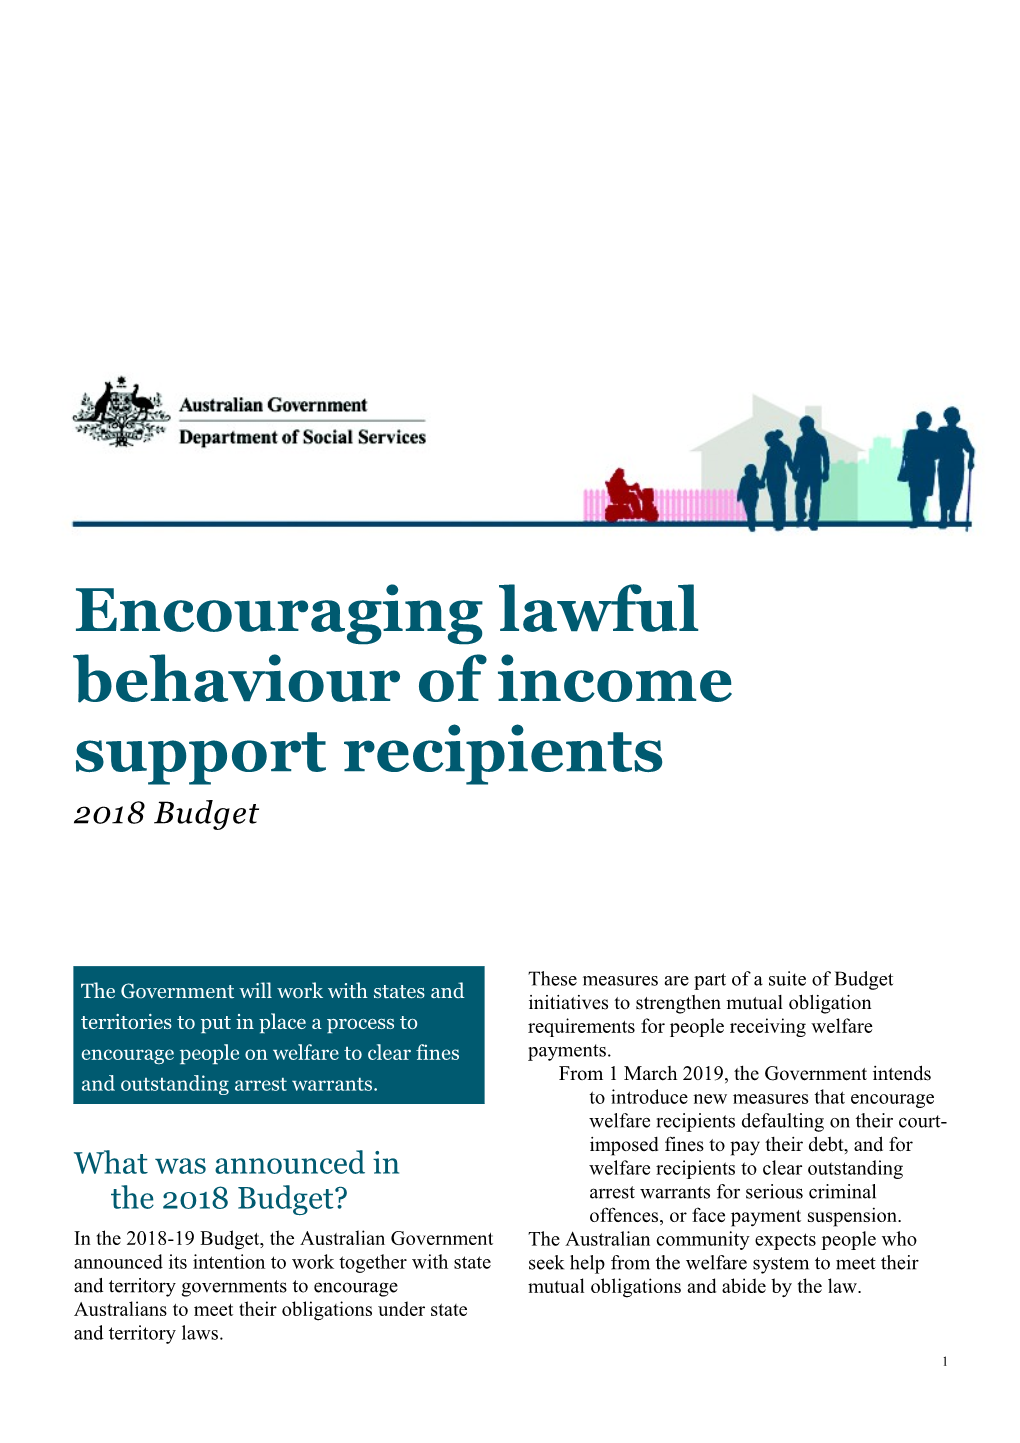 Encouraging Lawful Behaviour of Income Support Recipients